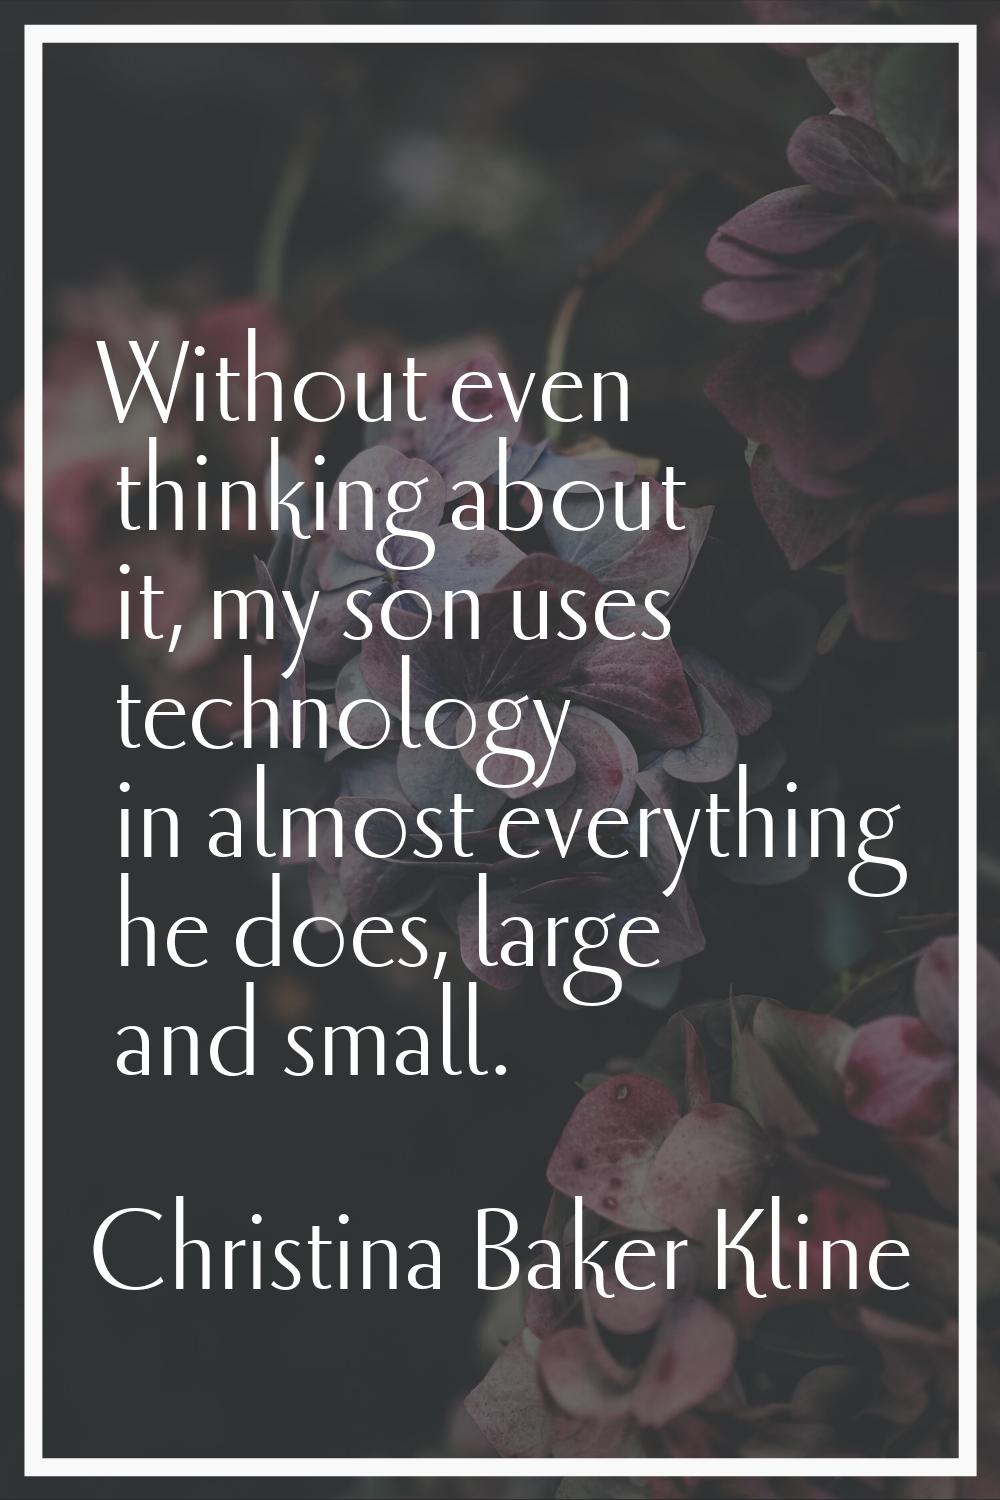 Without even thinking about it, my son uses technology in almost everything he does, large and smal